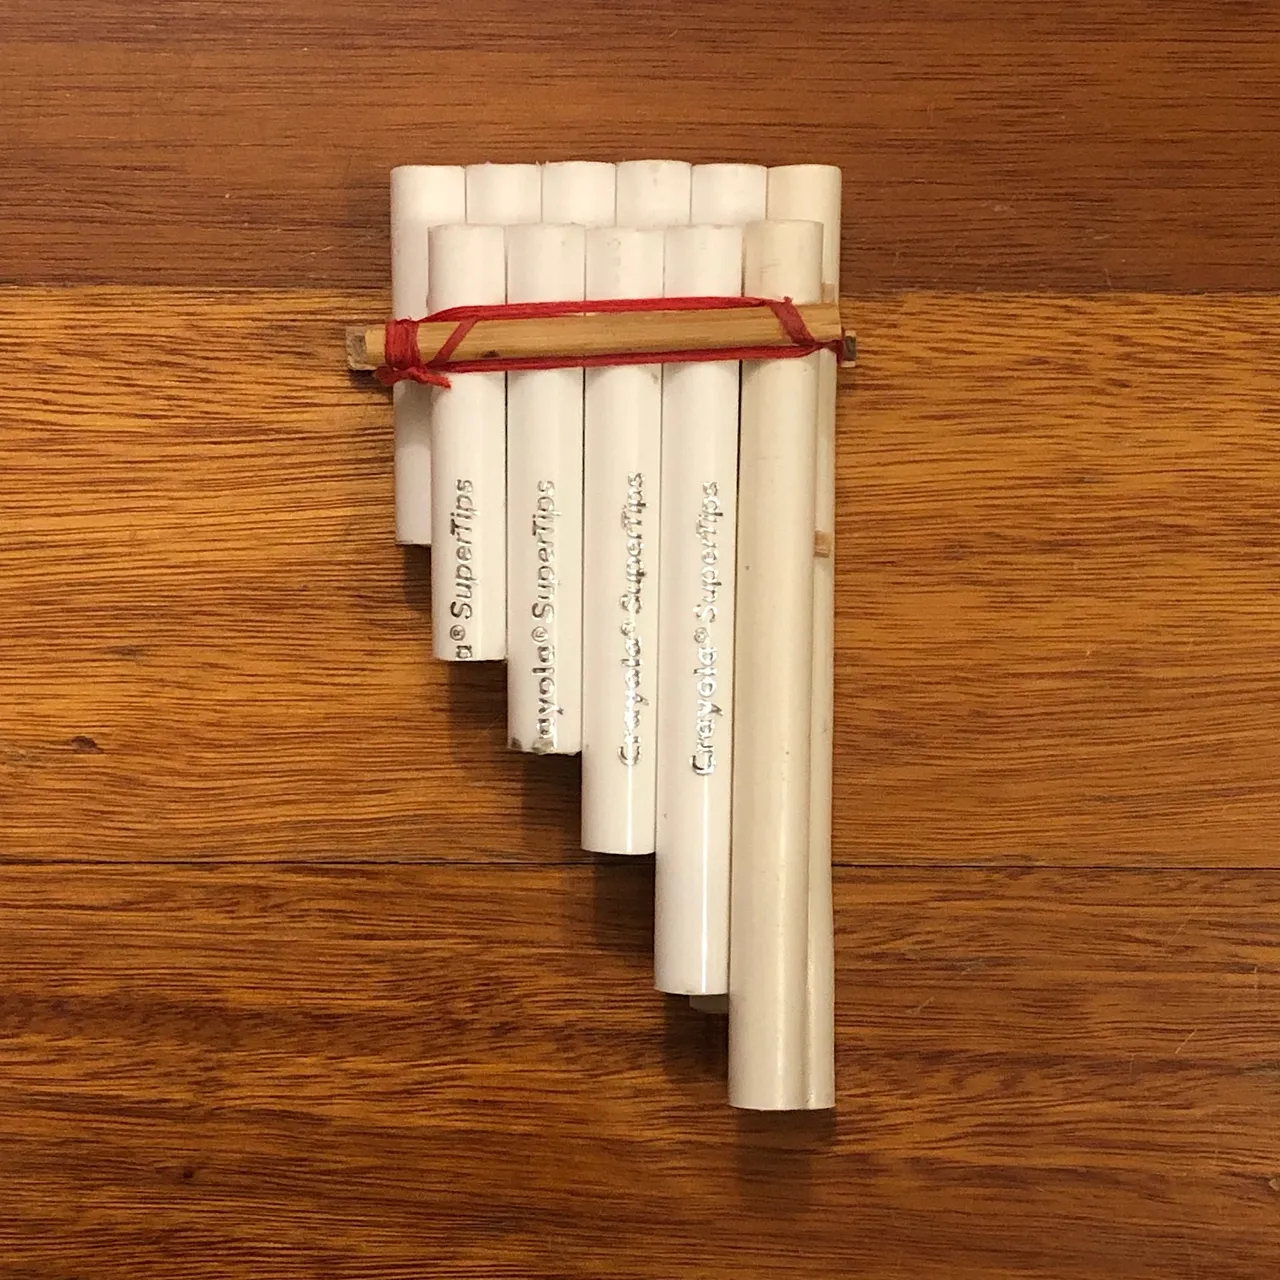 Pan flute made from colouring markers